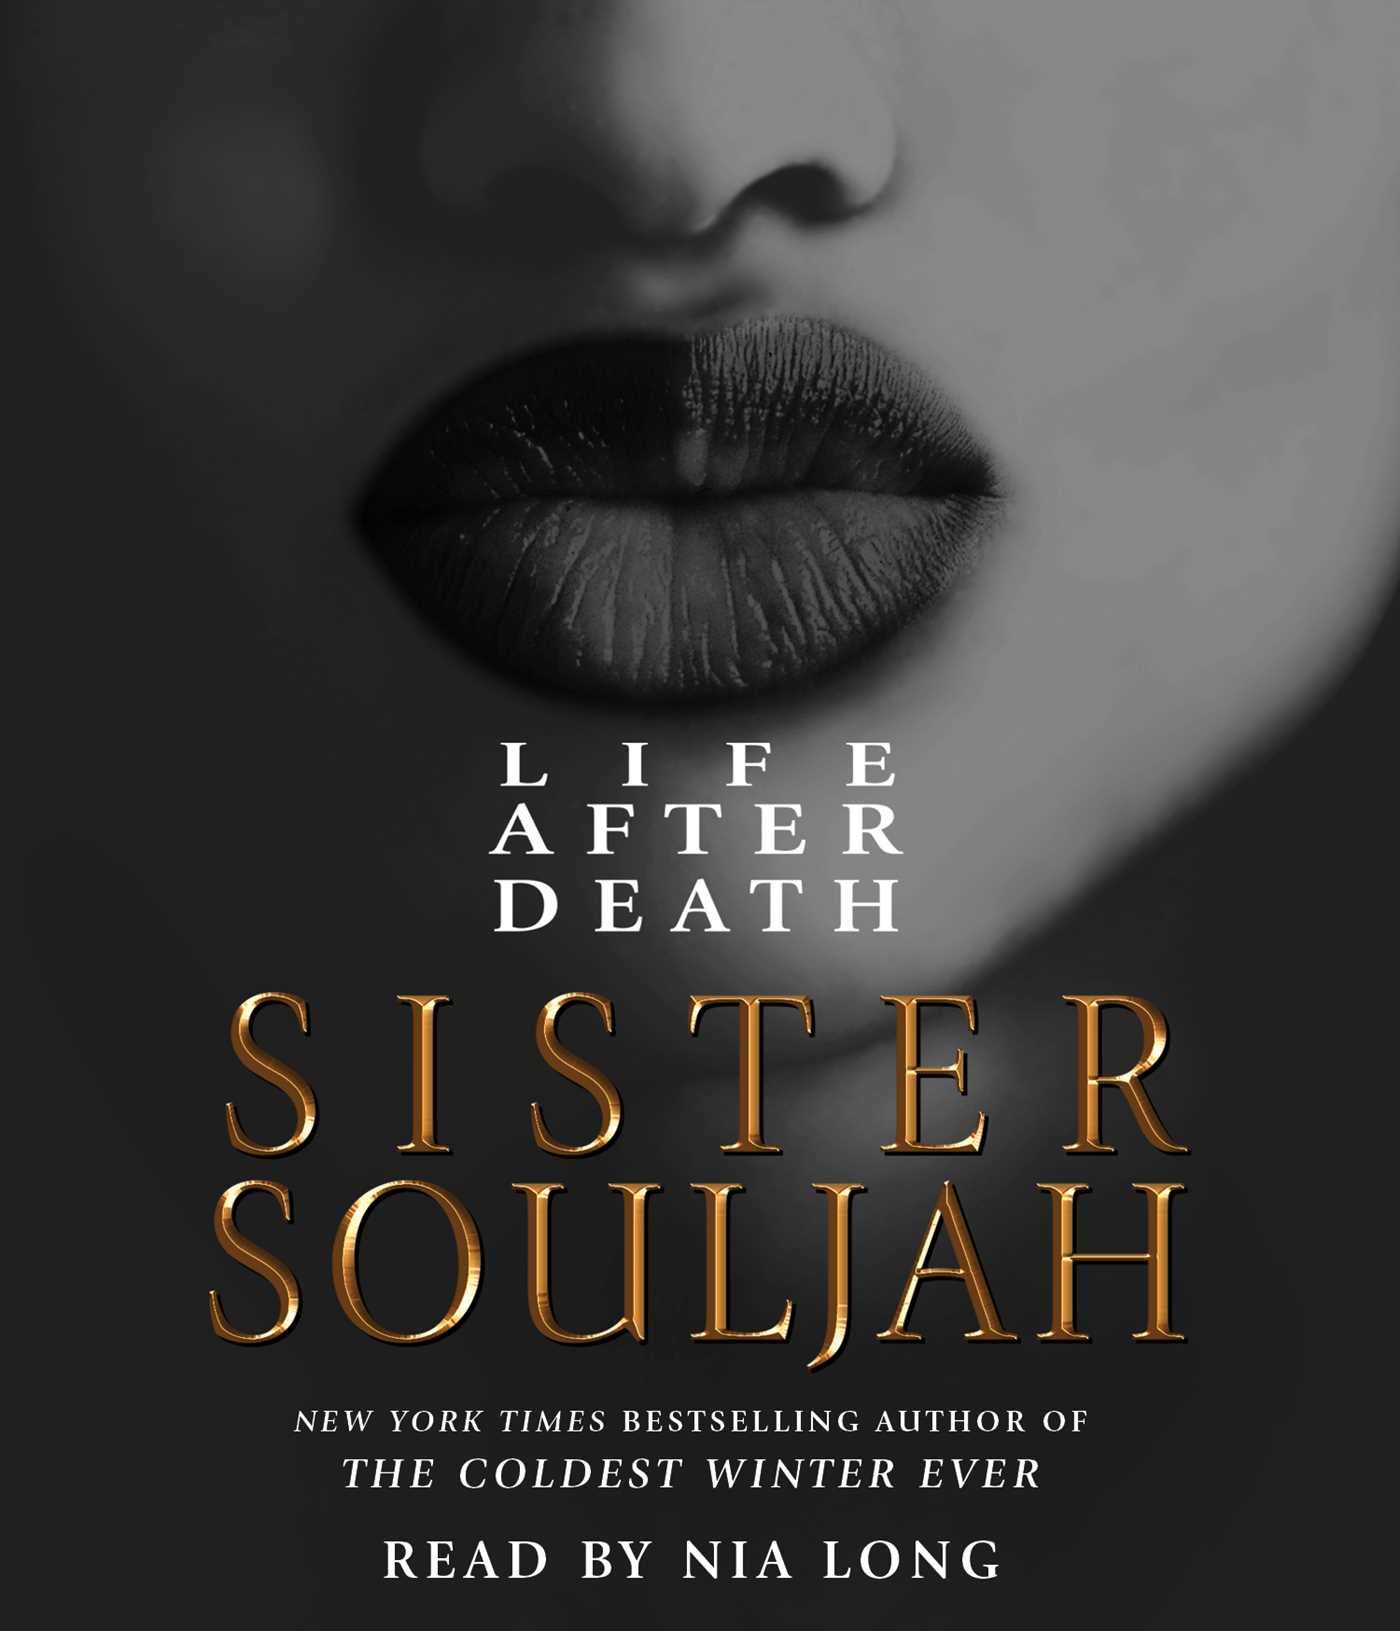 Sister Souljah to discuss her new book, “Life After Death” Live With Malik Books On Instagram Live